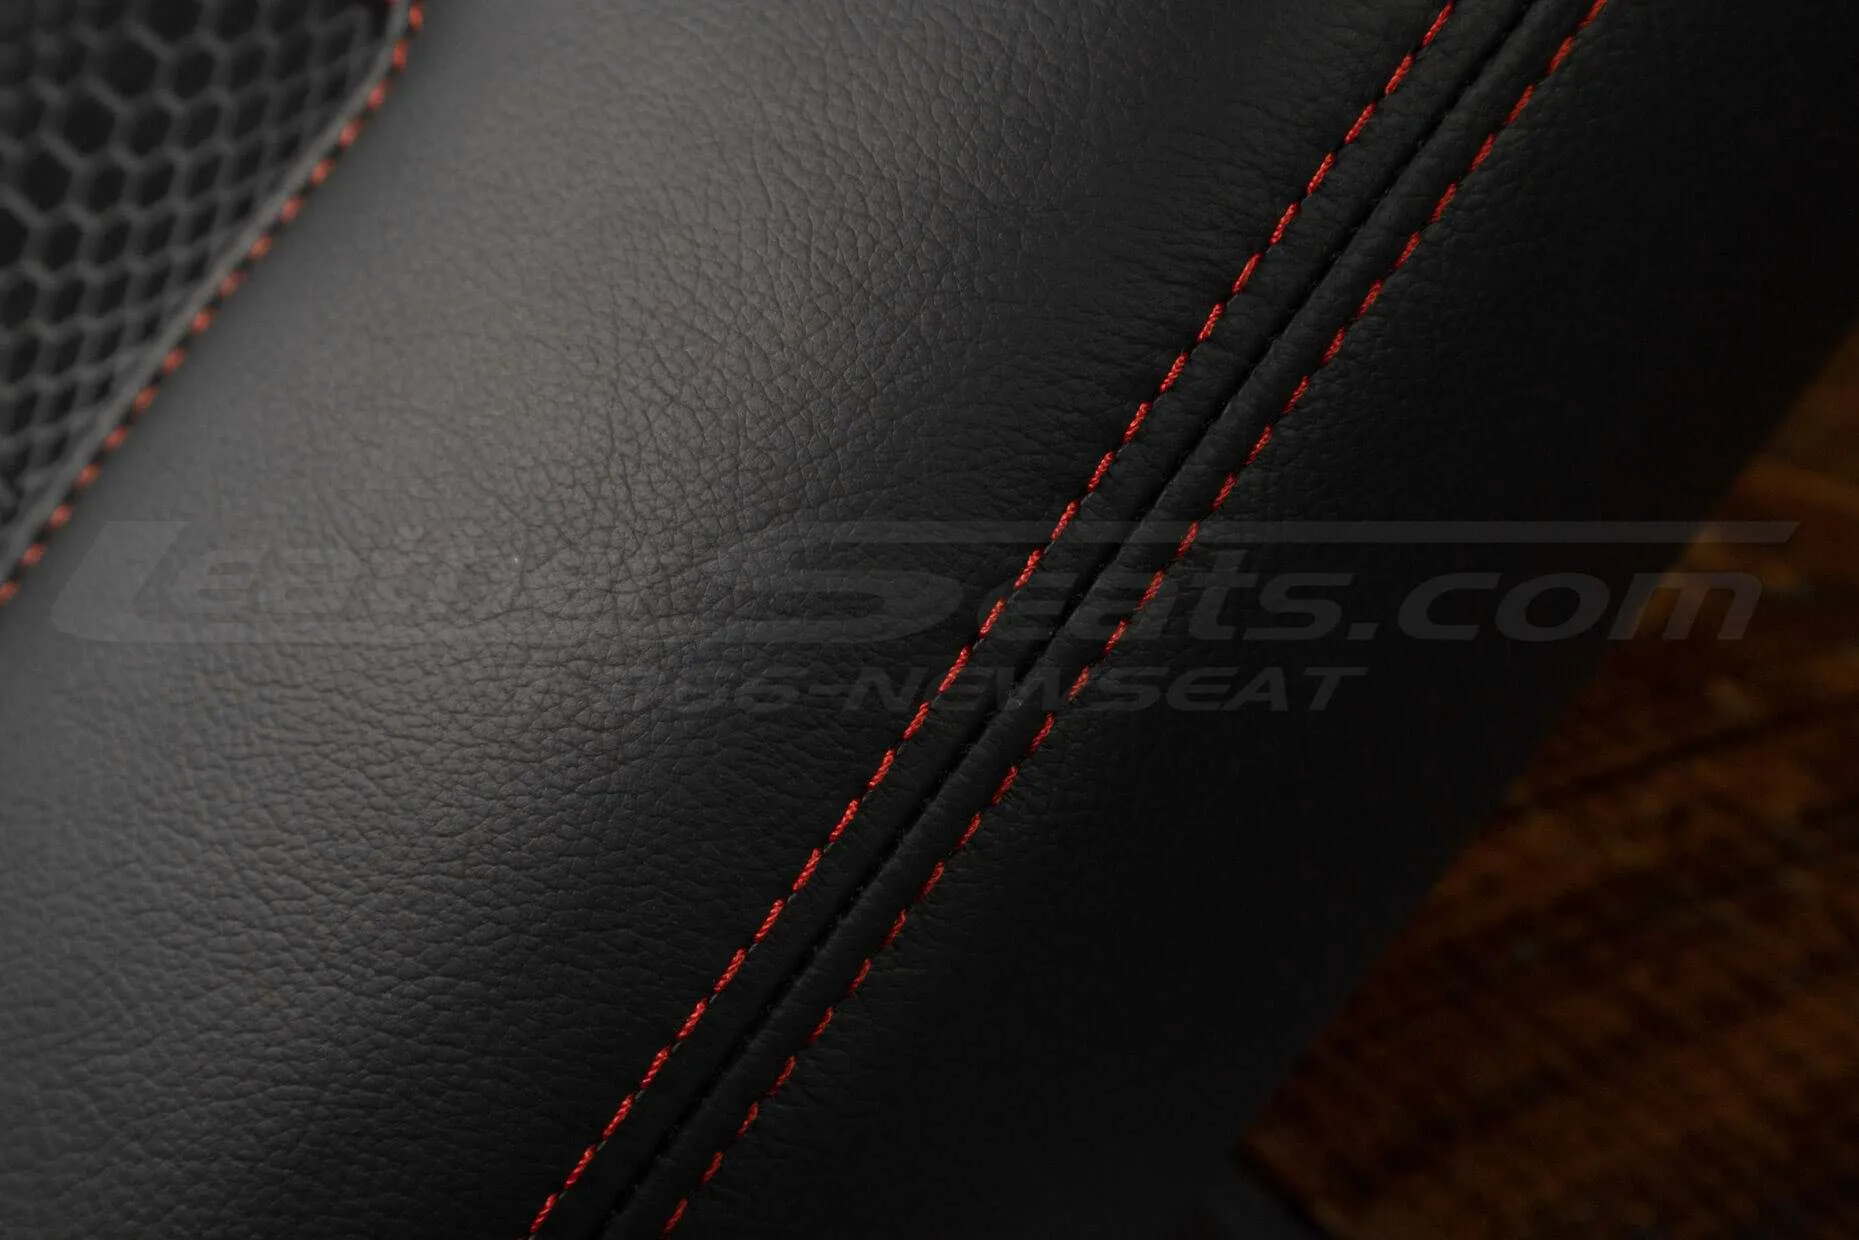 Contrasting Bright Red stitching on Black leather